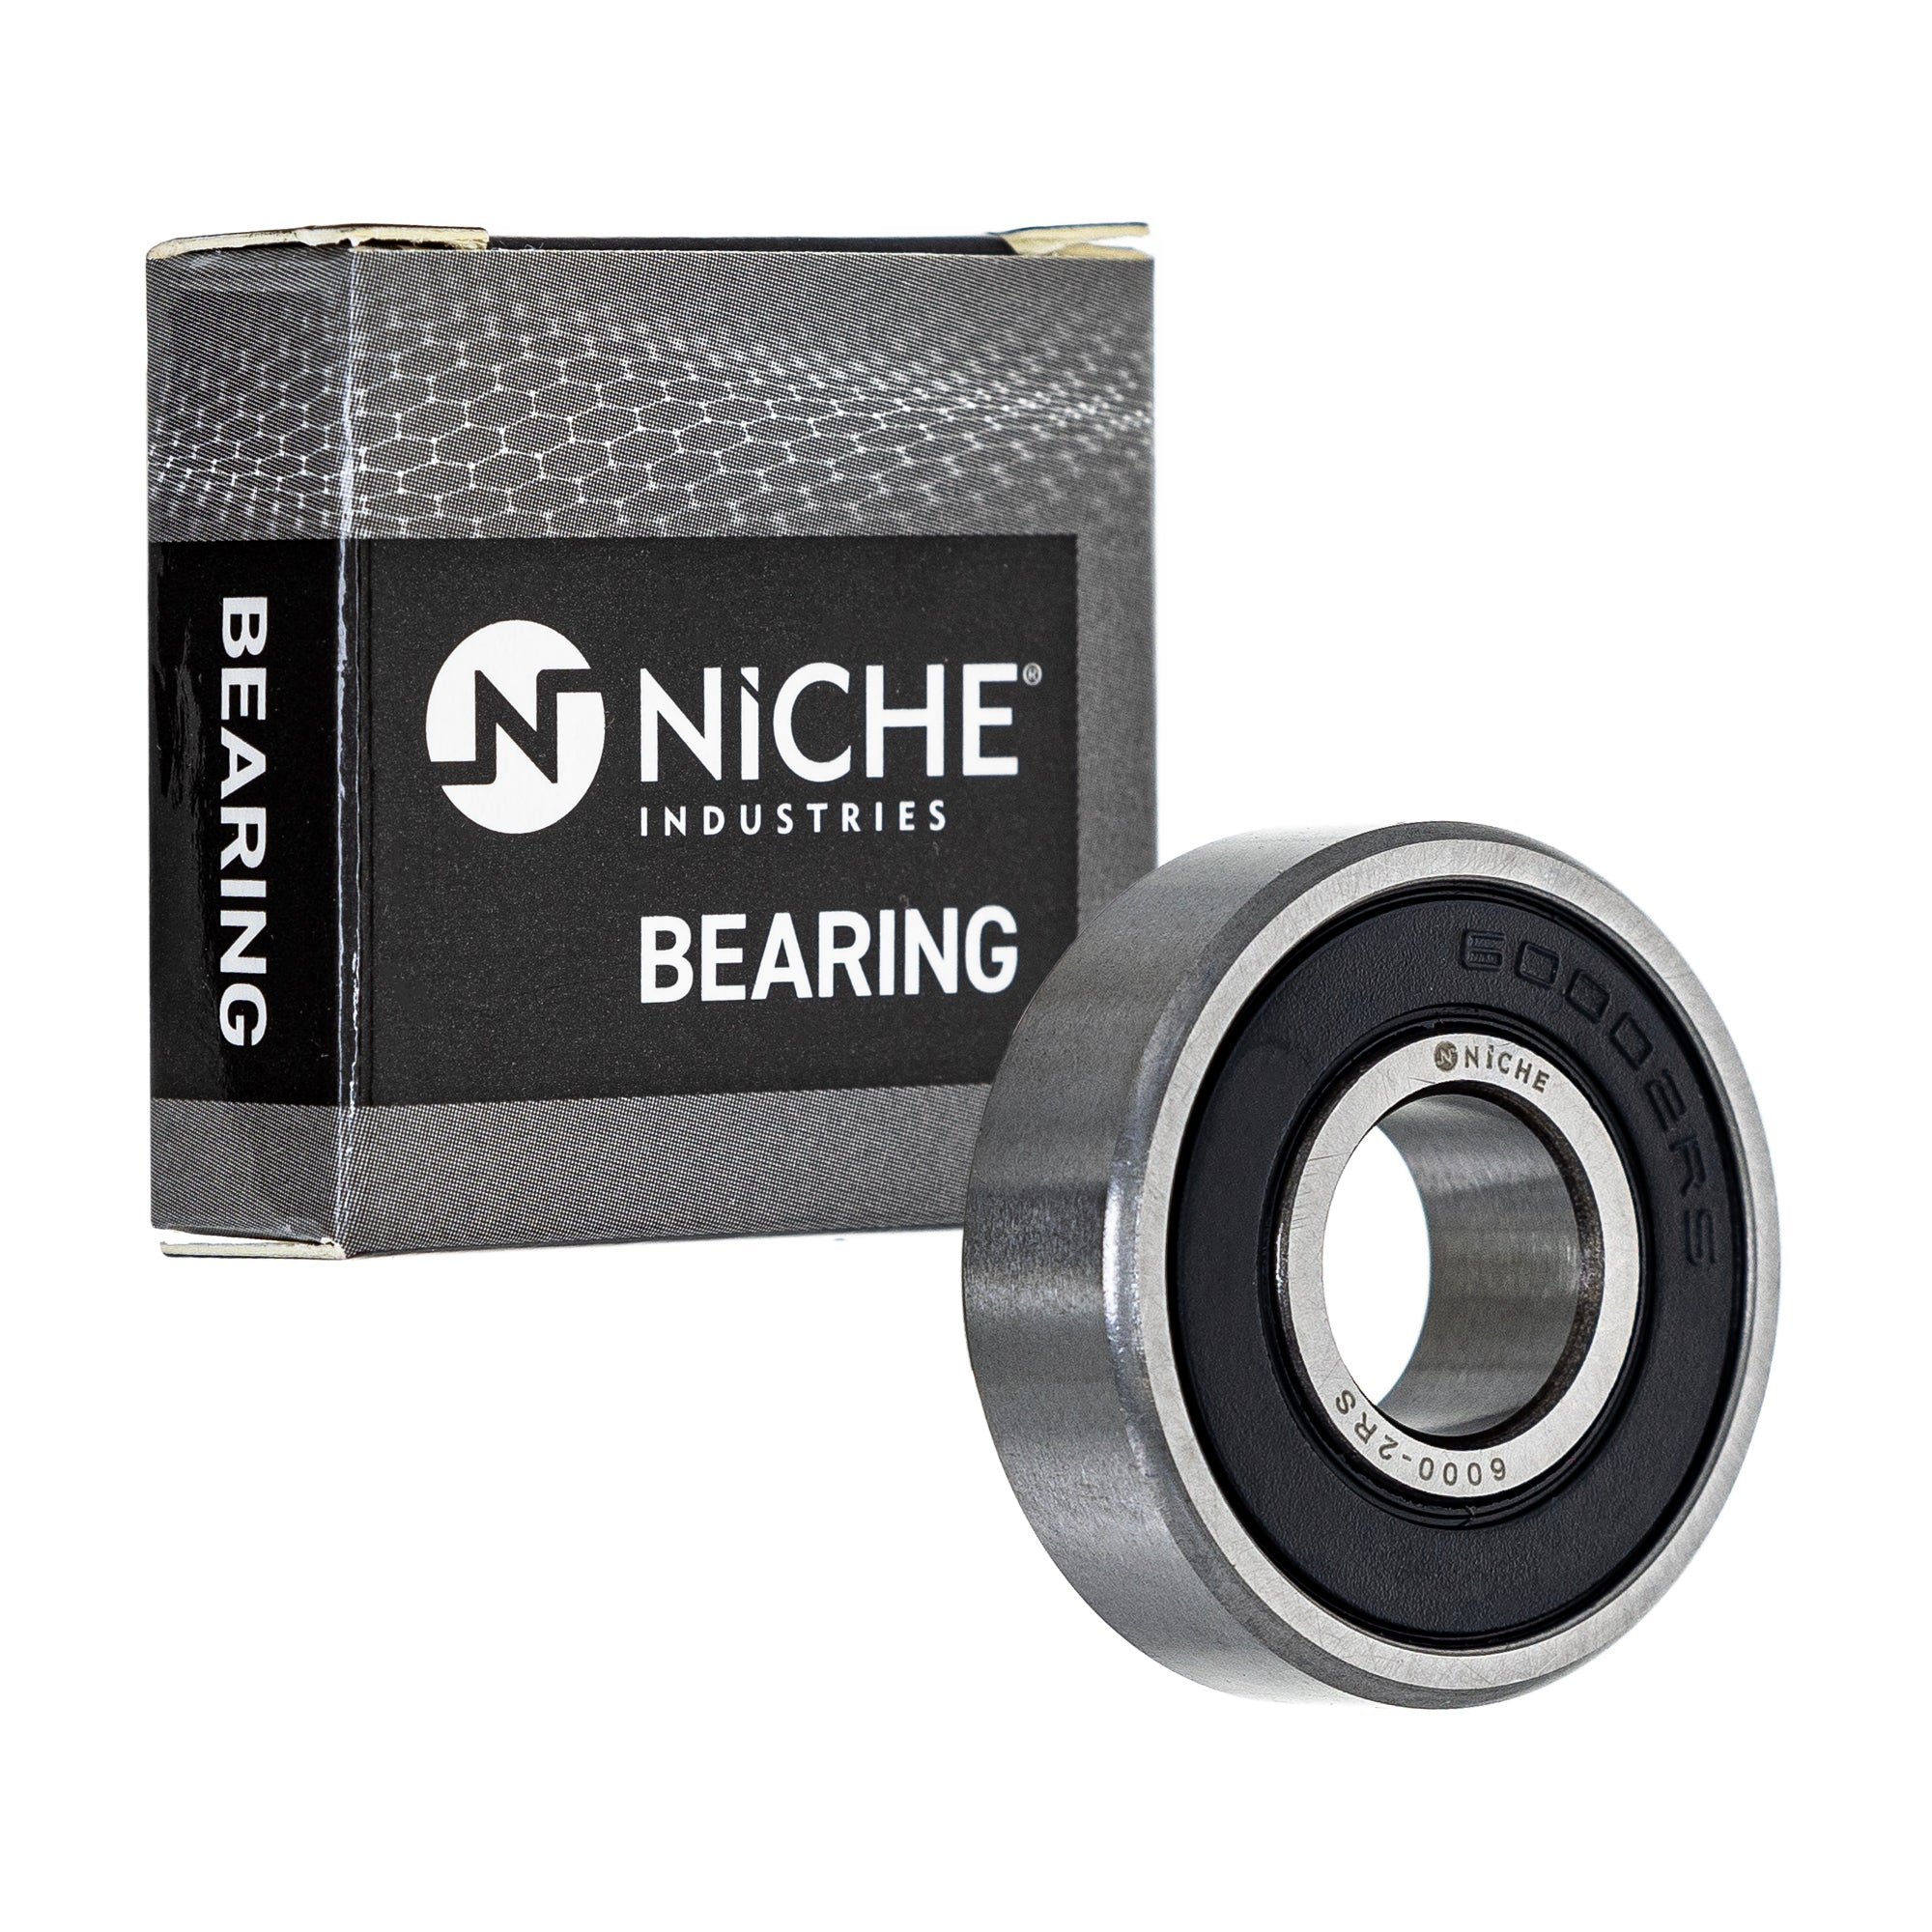 NICHE 519-CBB2256R Bearing 2-Pack for zOTHER KDX50 JR50